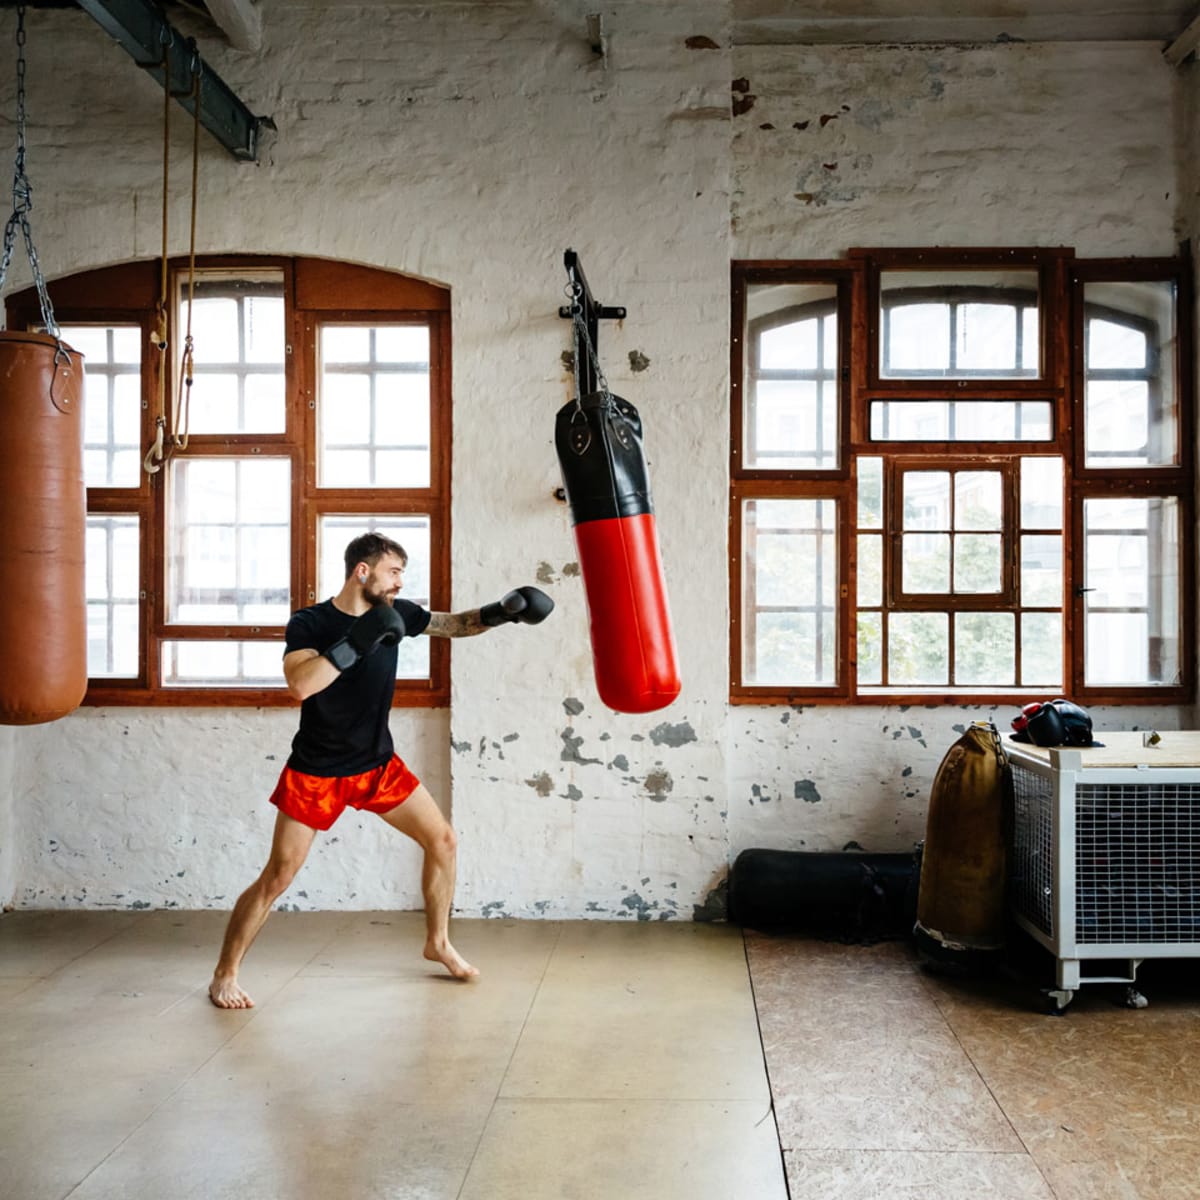 zweer Matroos Overblijvend 5 Boxing Workout Routines to Get in Lean Fighting Shape - Men's Journal